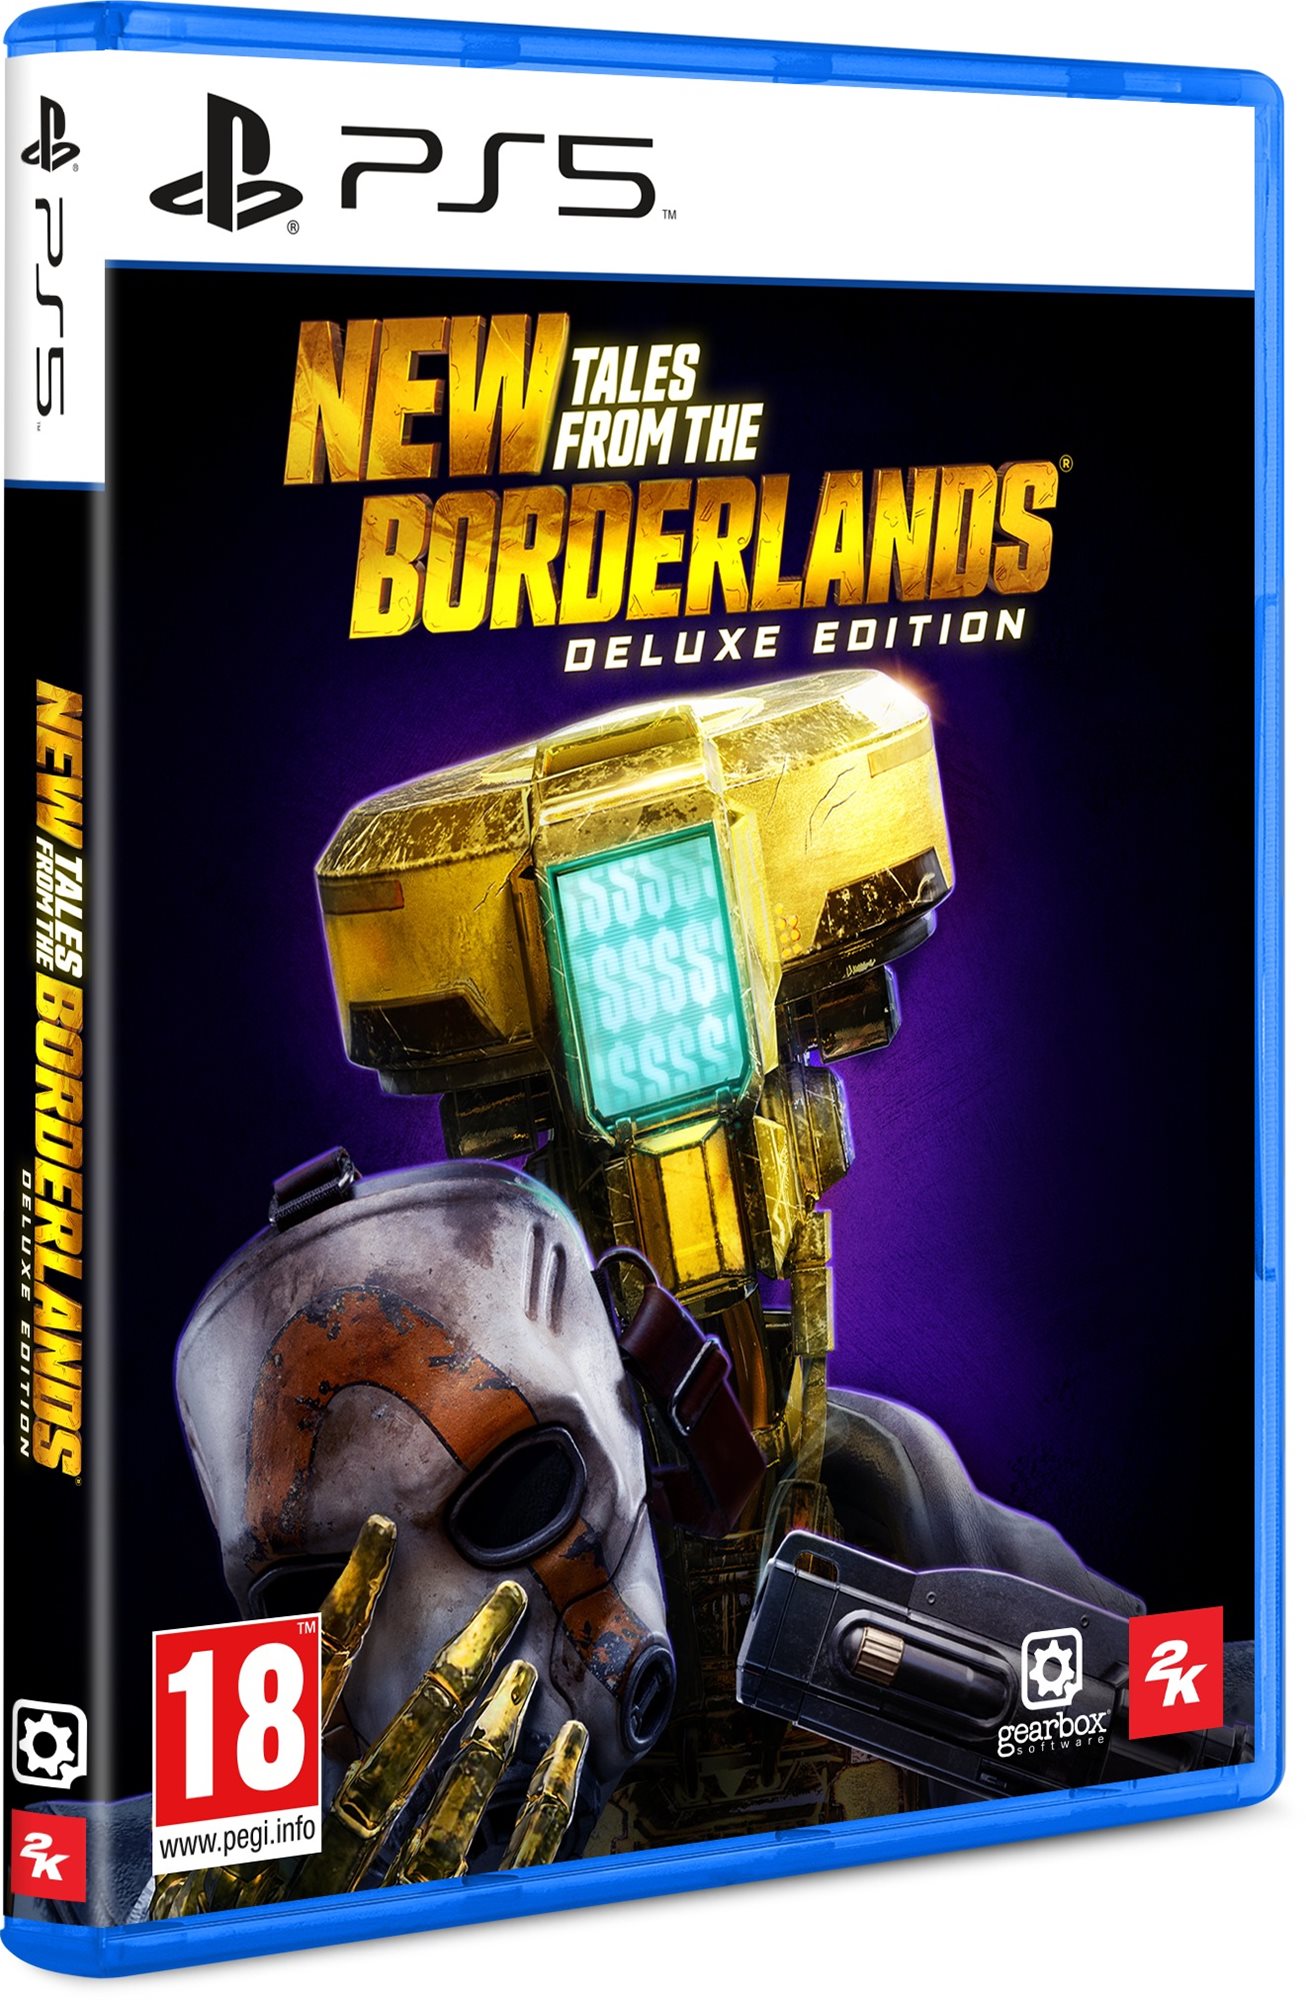 New Tales from the Borderlands: Deluxe Edition - PS5